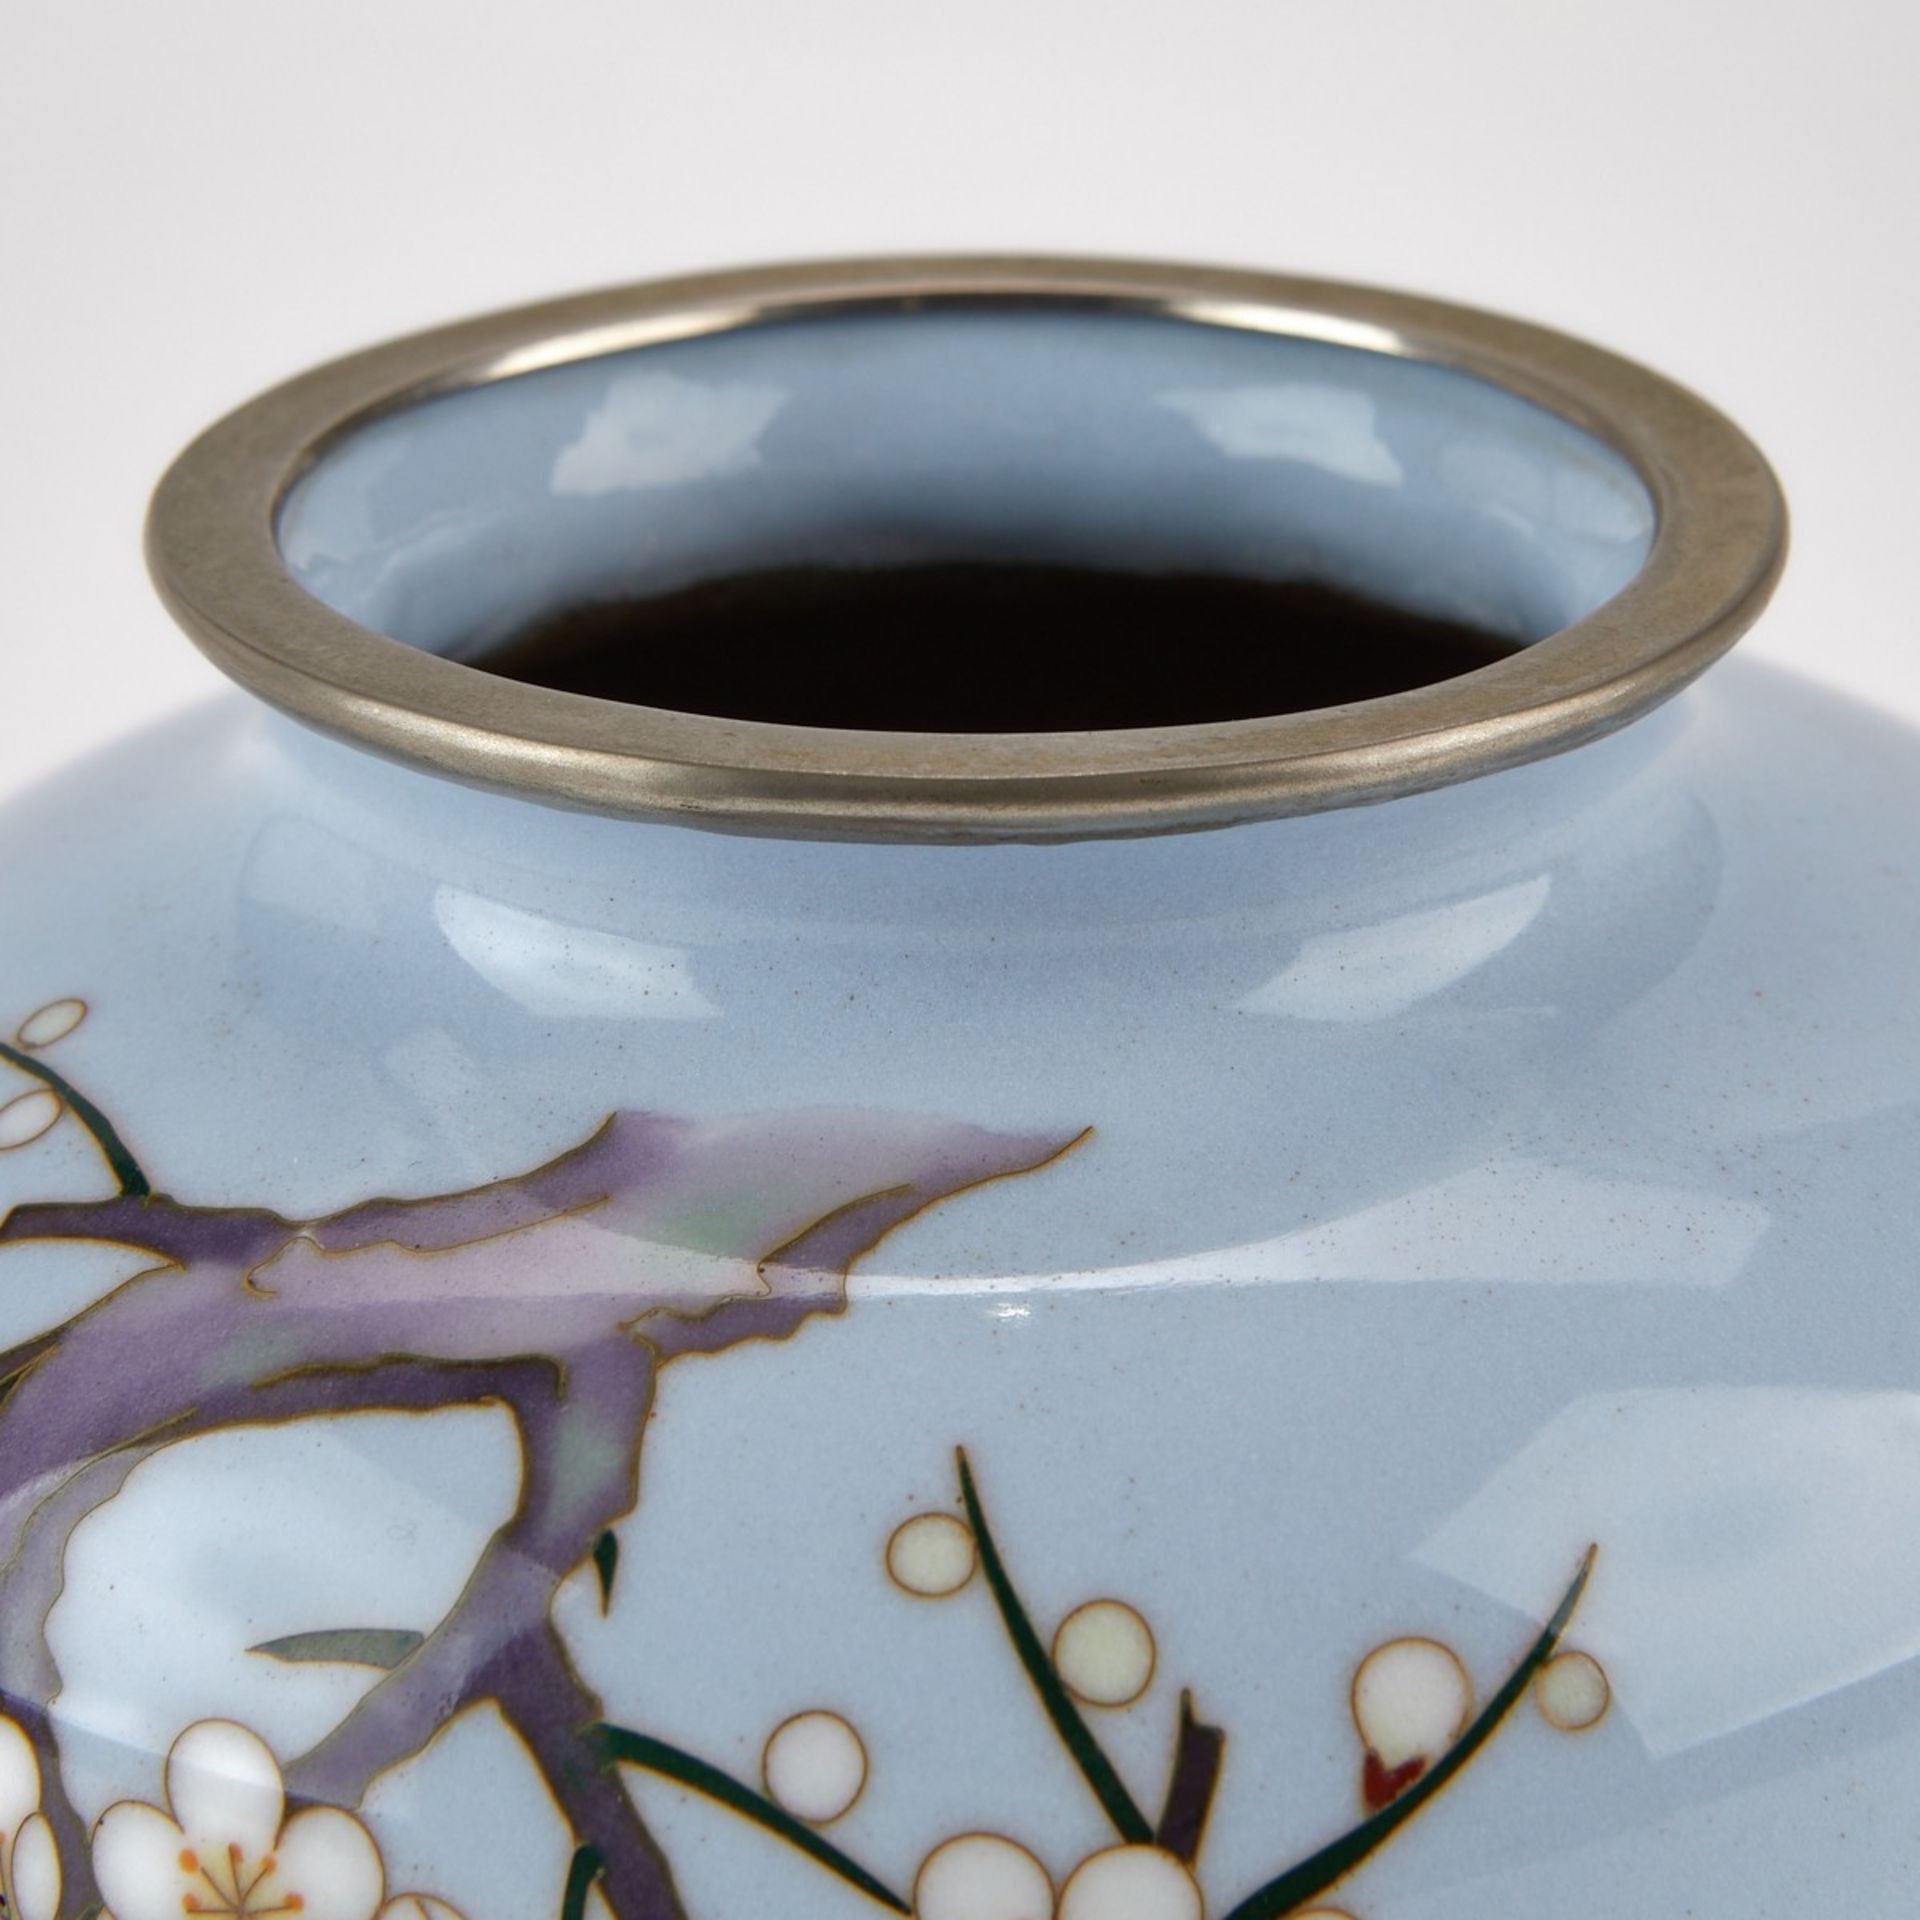 Japanese Cloisonne Vase w/ Cherry Blossoms and Bird - Image 3 of 5